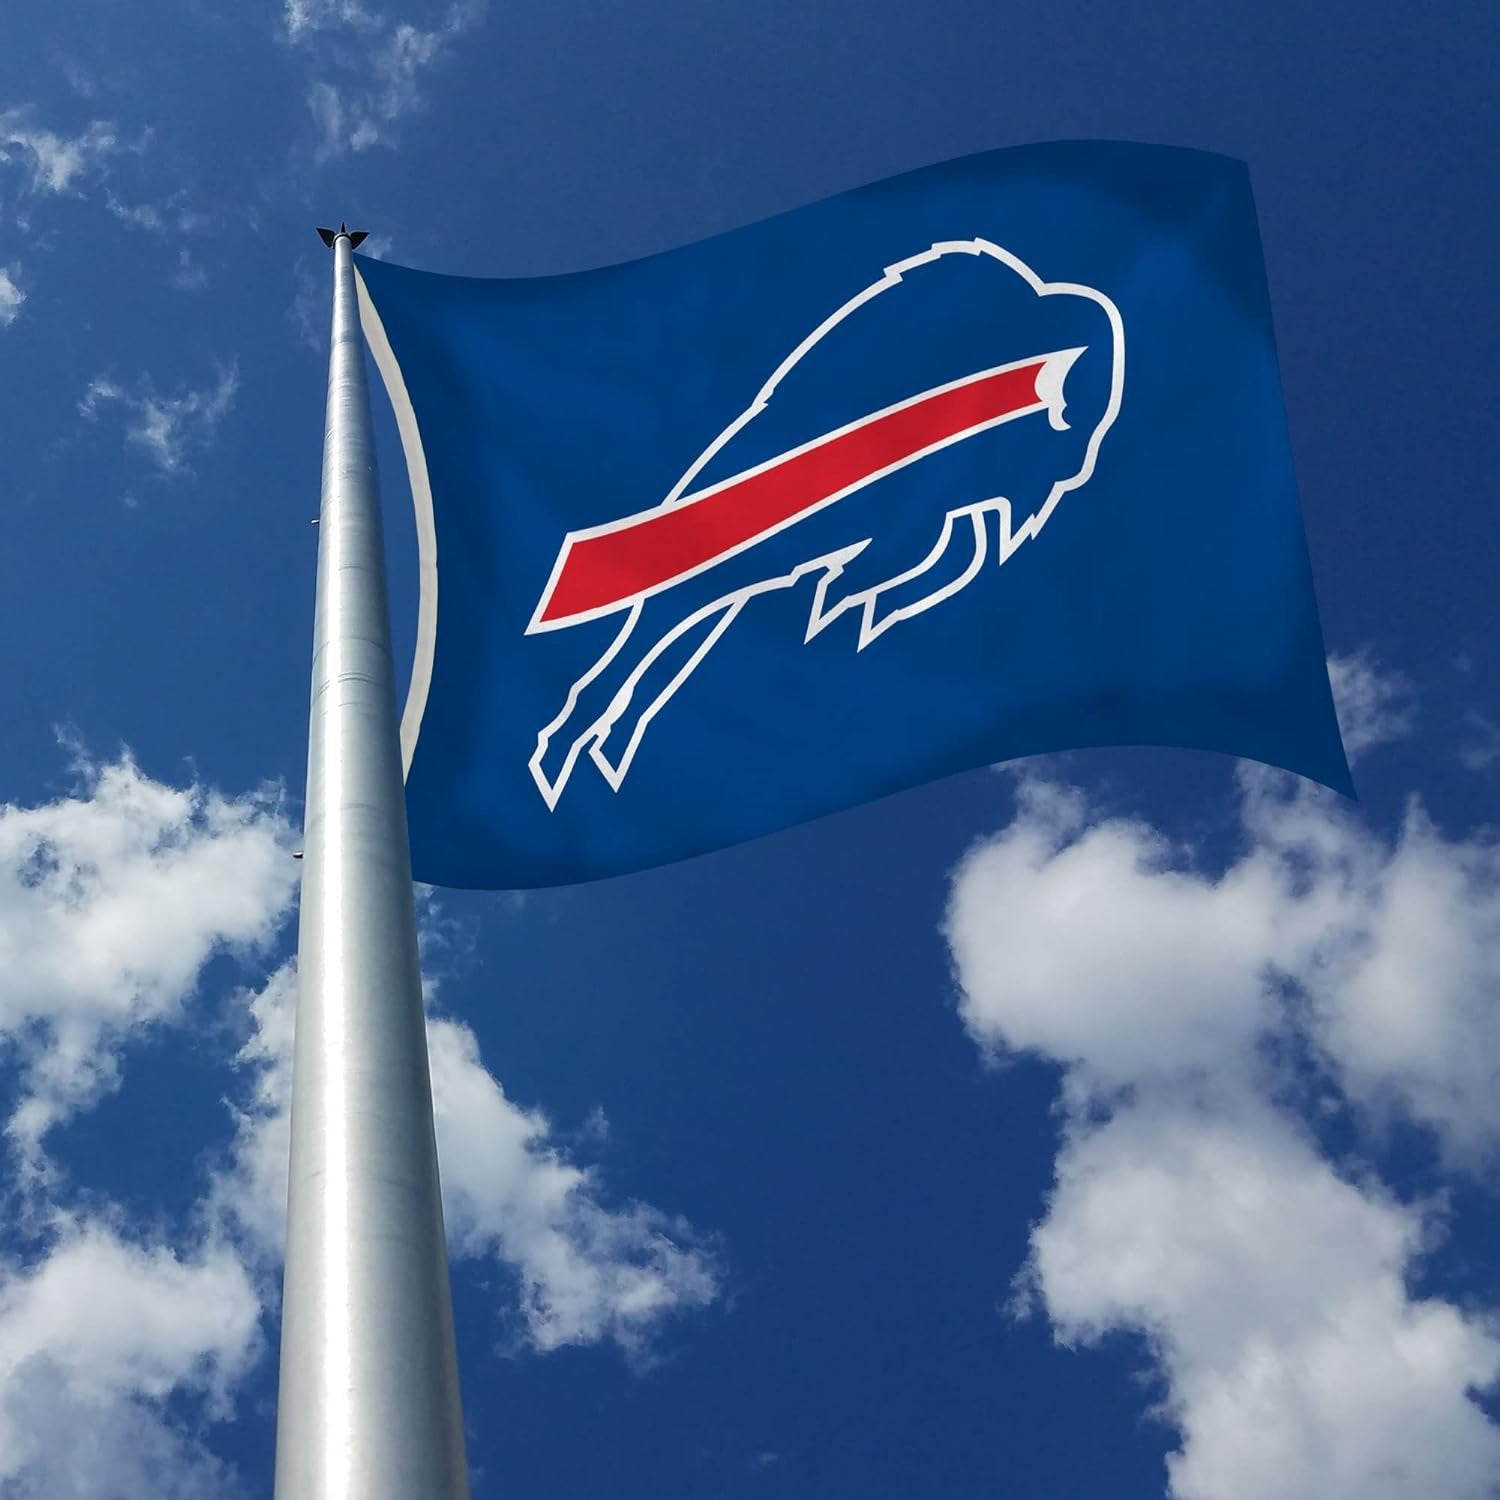 Buffalo Bills 3x5 Foot Flag Banner, Metal Grommets, Indoor or Outdoor Use, Single Sided, Blue Background